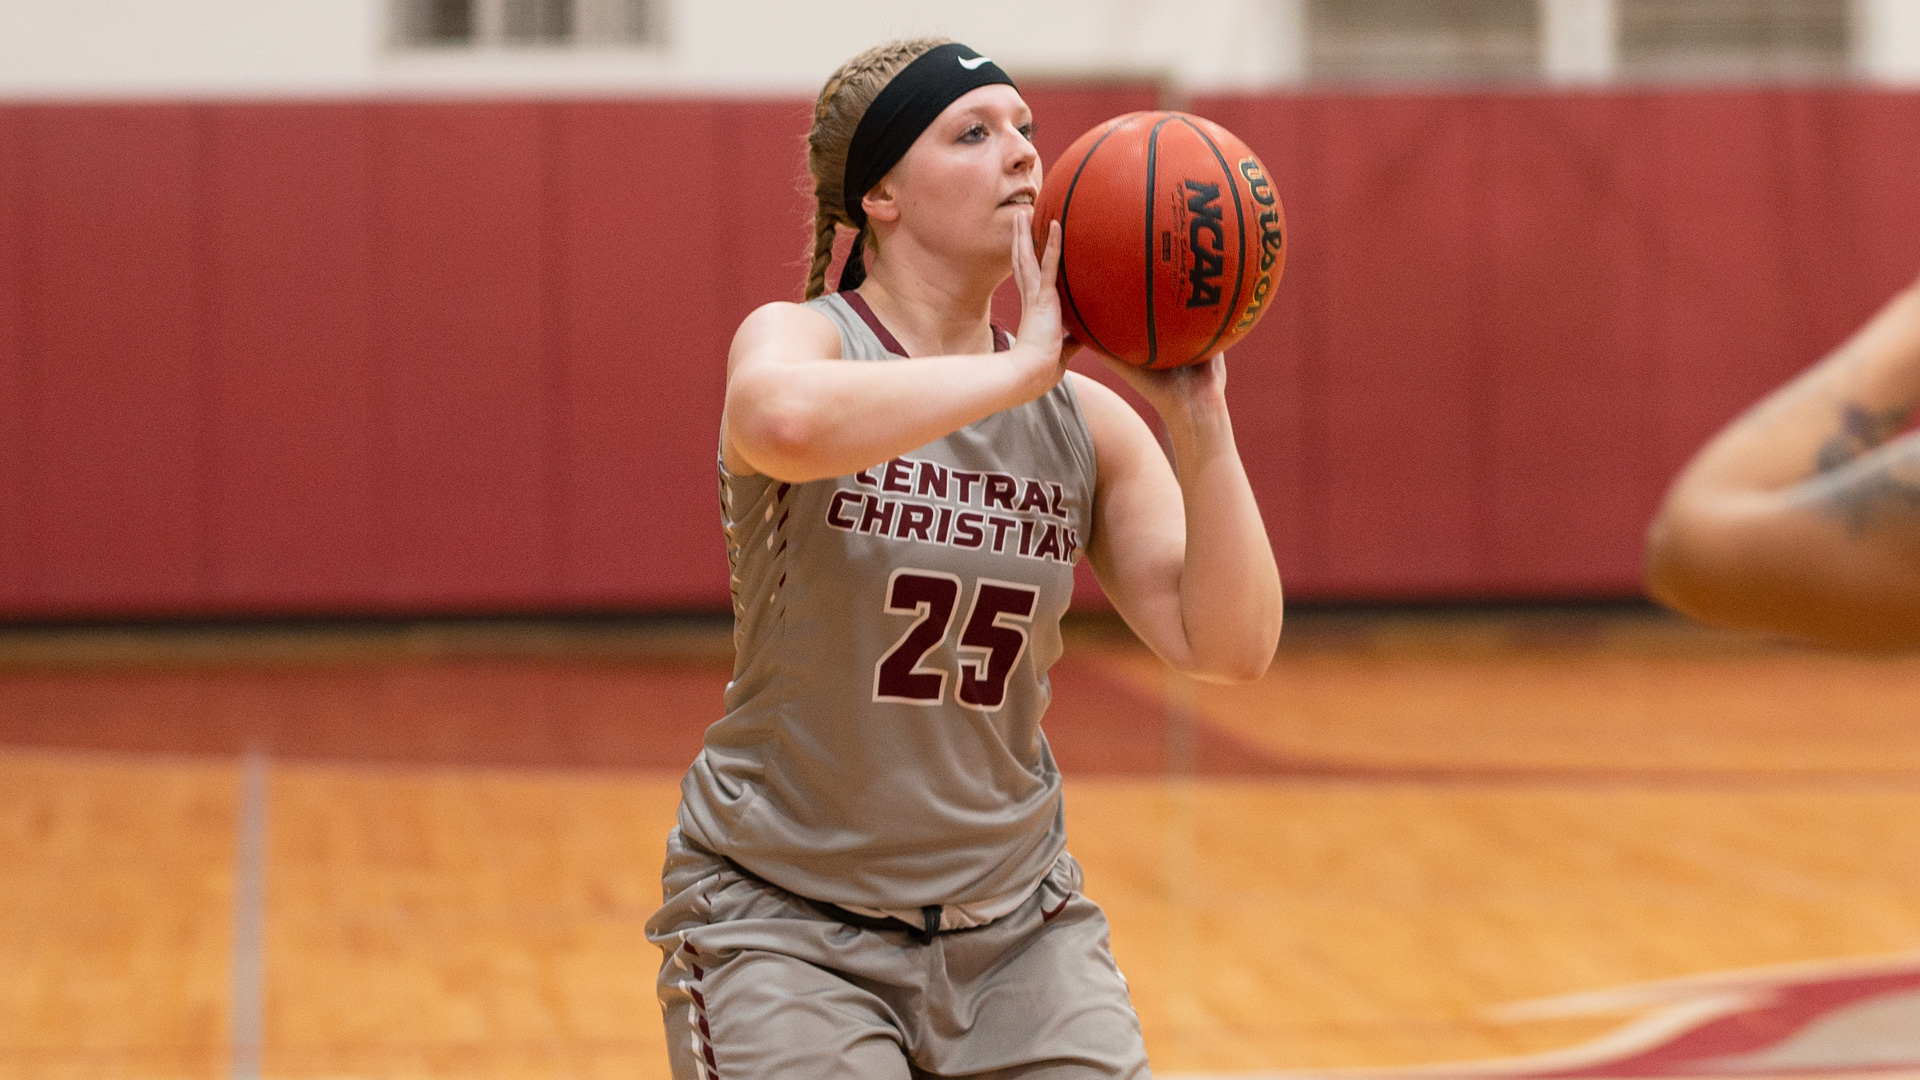 CCCB freshman Alexis Whisenand scored four points and grabbed four rebounds in the Saints' 81-63 win over Barclay College on Saturday.